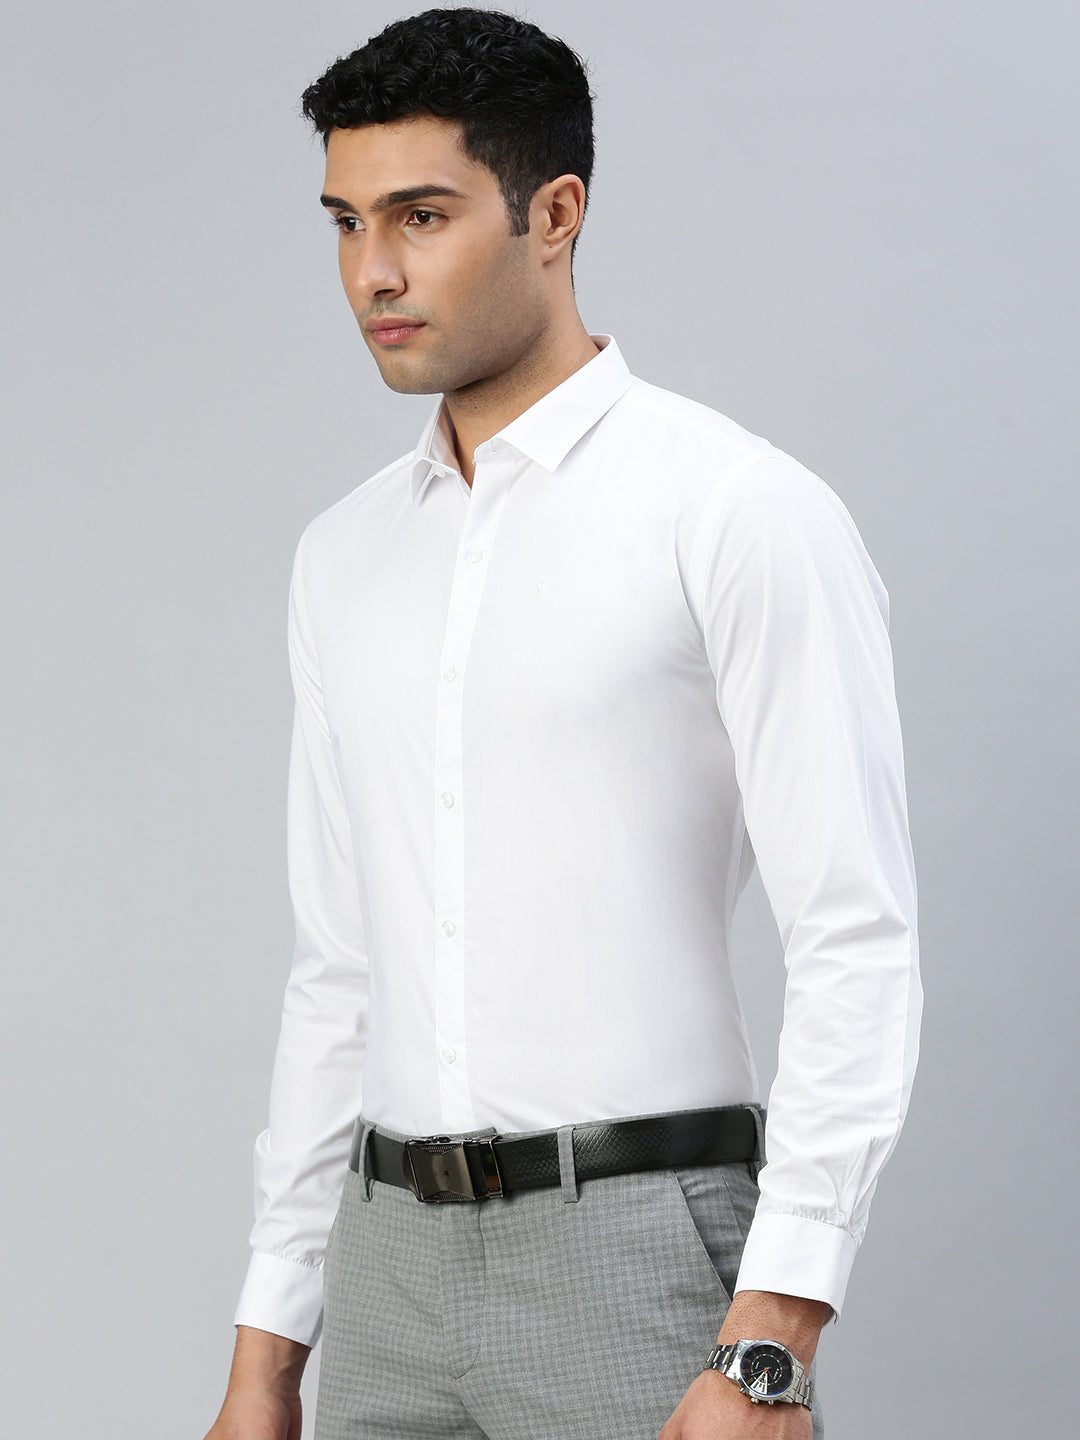 Mens Cotton Smart Fit White Shirt Full Sleeves Without Pocket